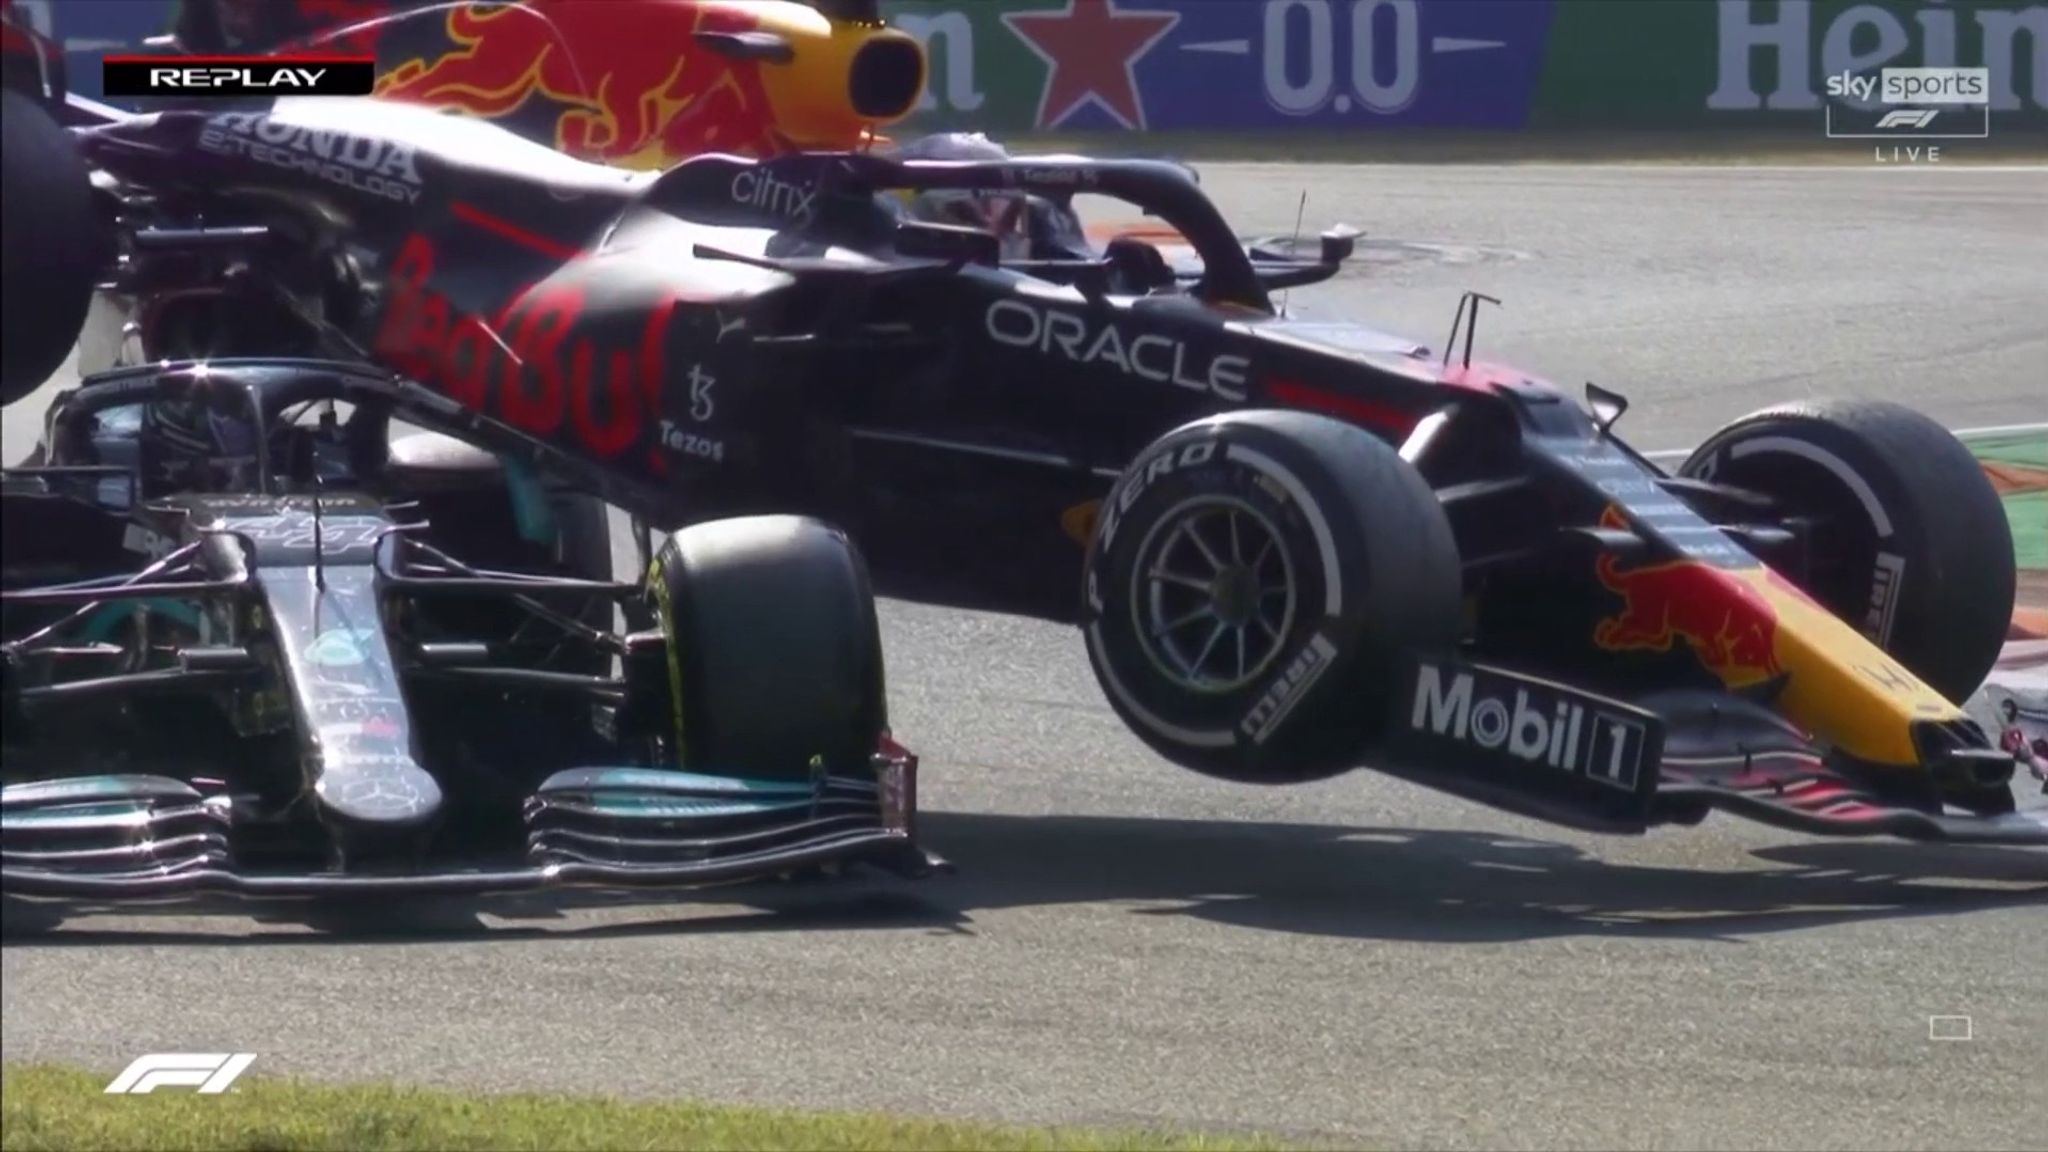 Lewis Hamilton Vs Max Verstappen Explaining The Frightening F1 Crash The Penalty And How Halo Saved Mercedes Driver F1 News